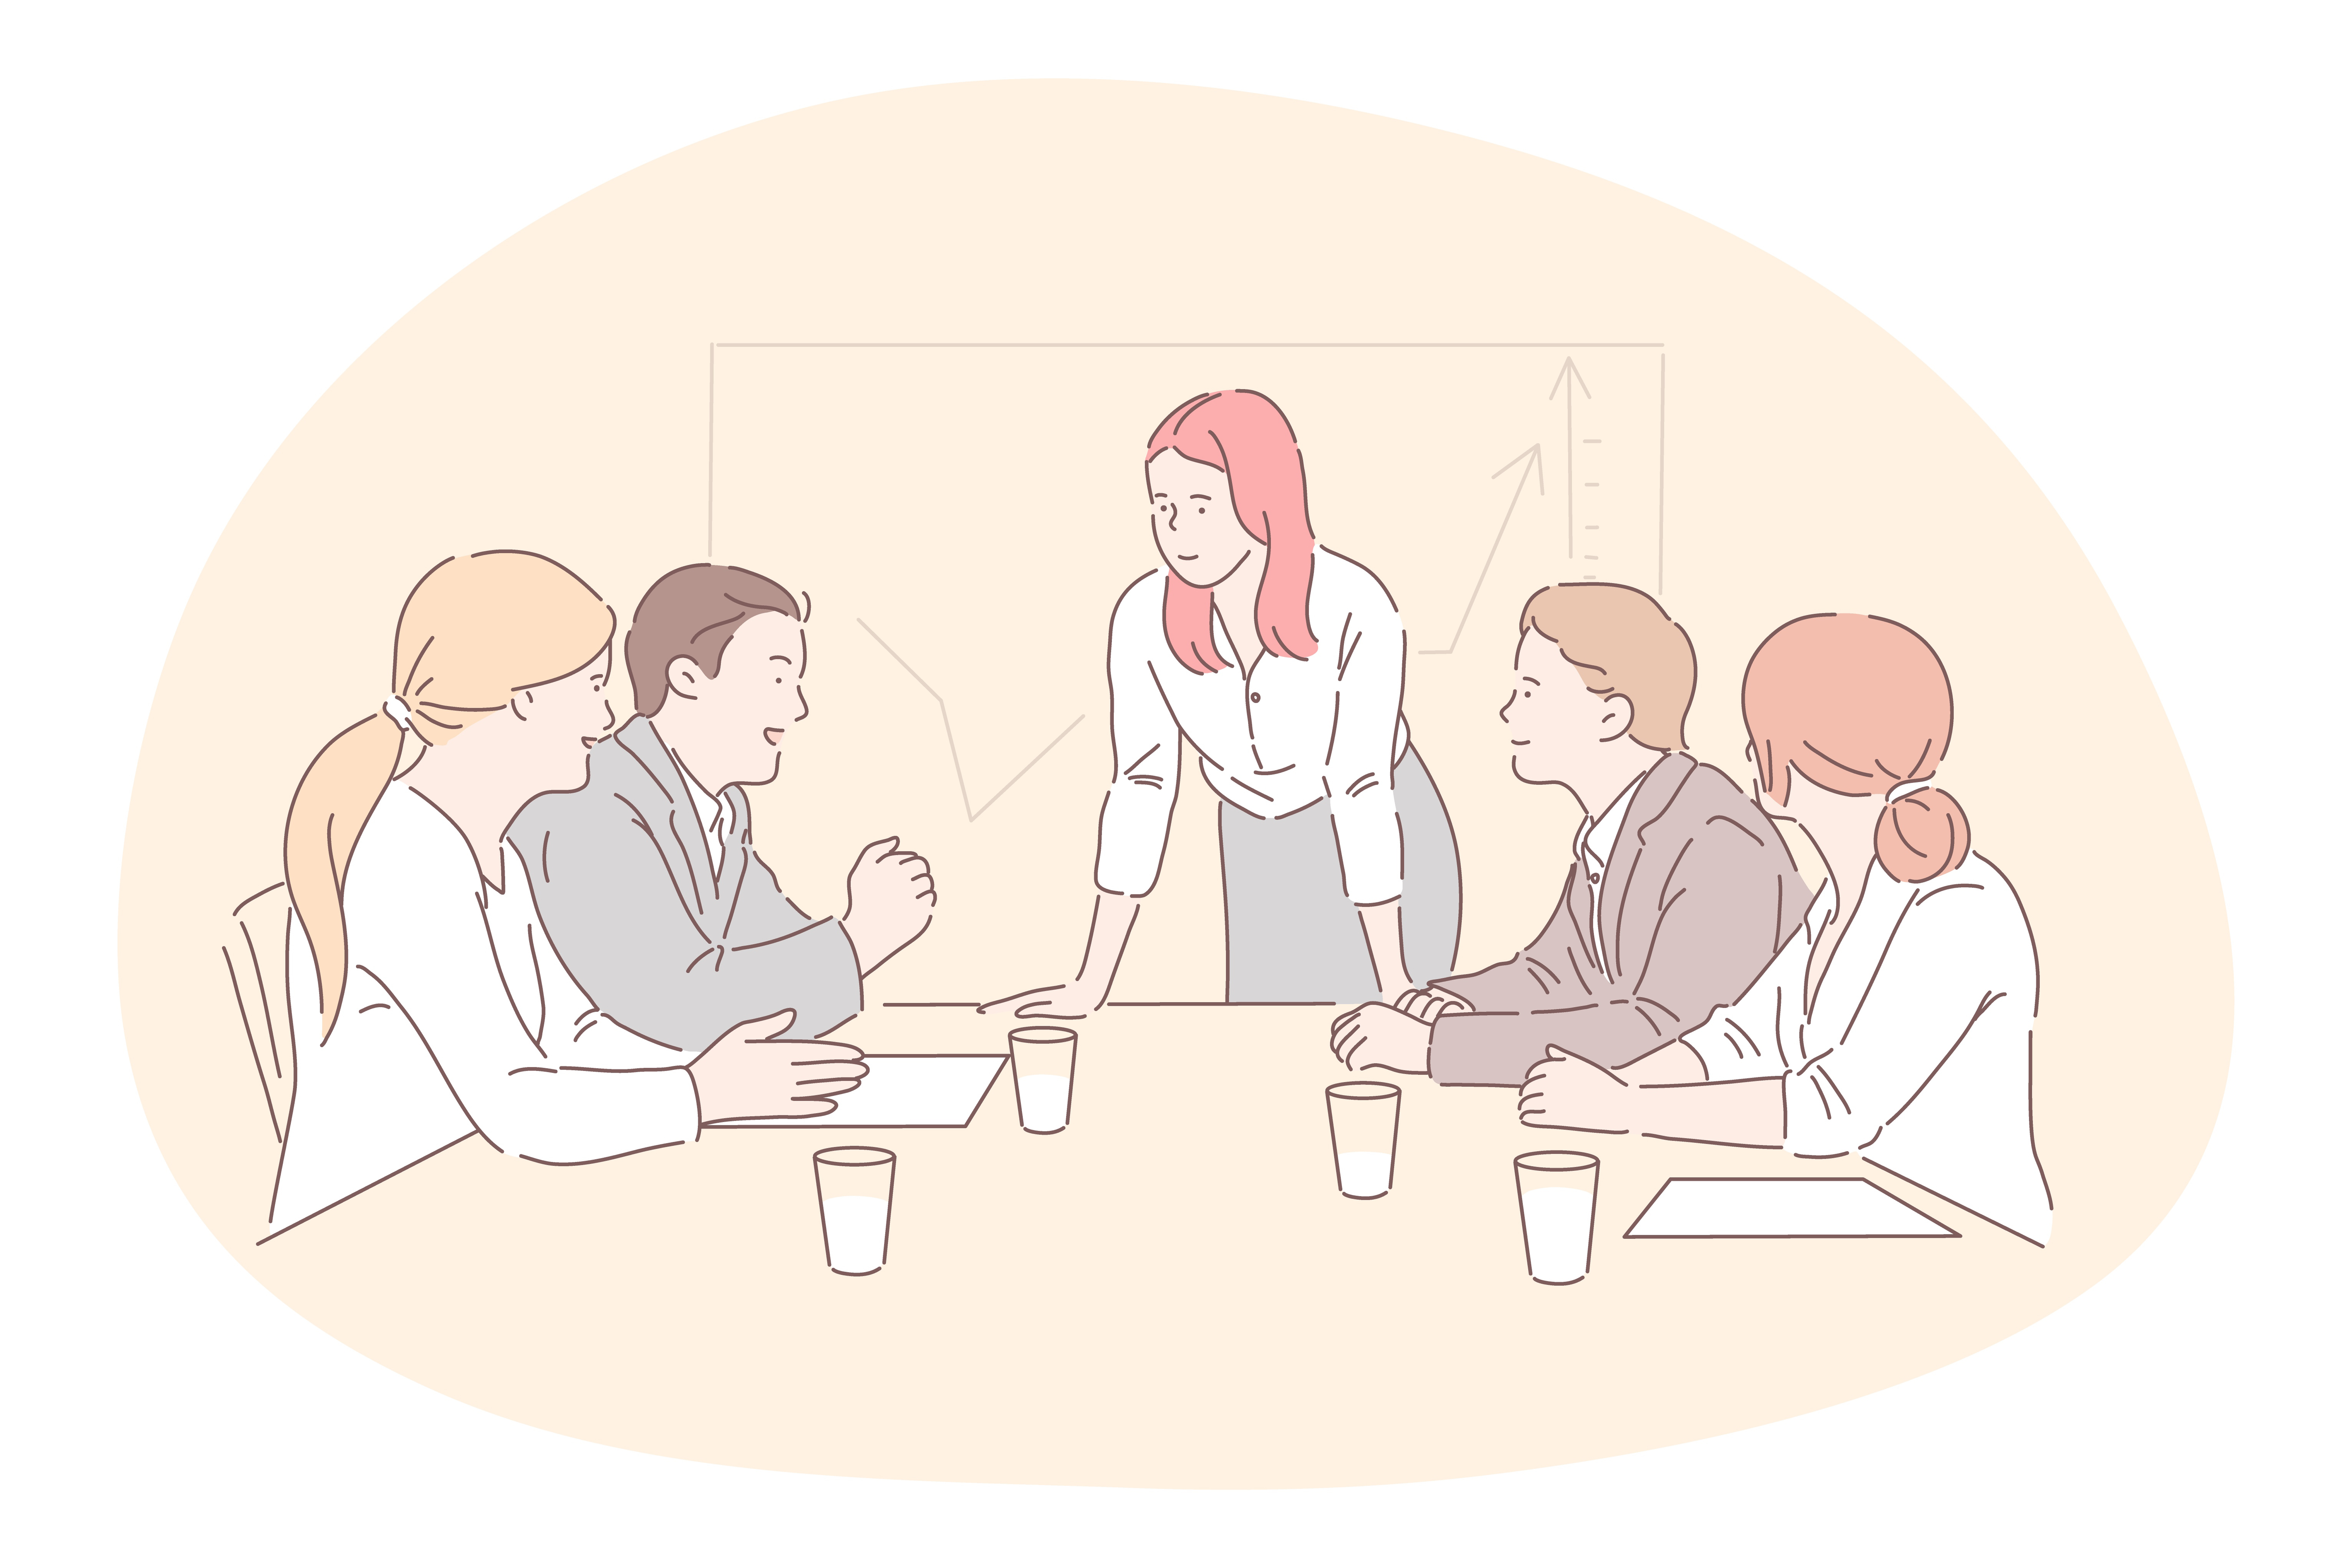 Meeting, teamwork, analysis, cooperation, business concept. Team of businessmen women managers partners colleagues collaborate discussing project at office together. Planning strategy or brainstorming. Meeting, teamwork, analysis, cooperation, brainstorming, business concept